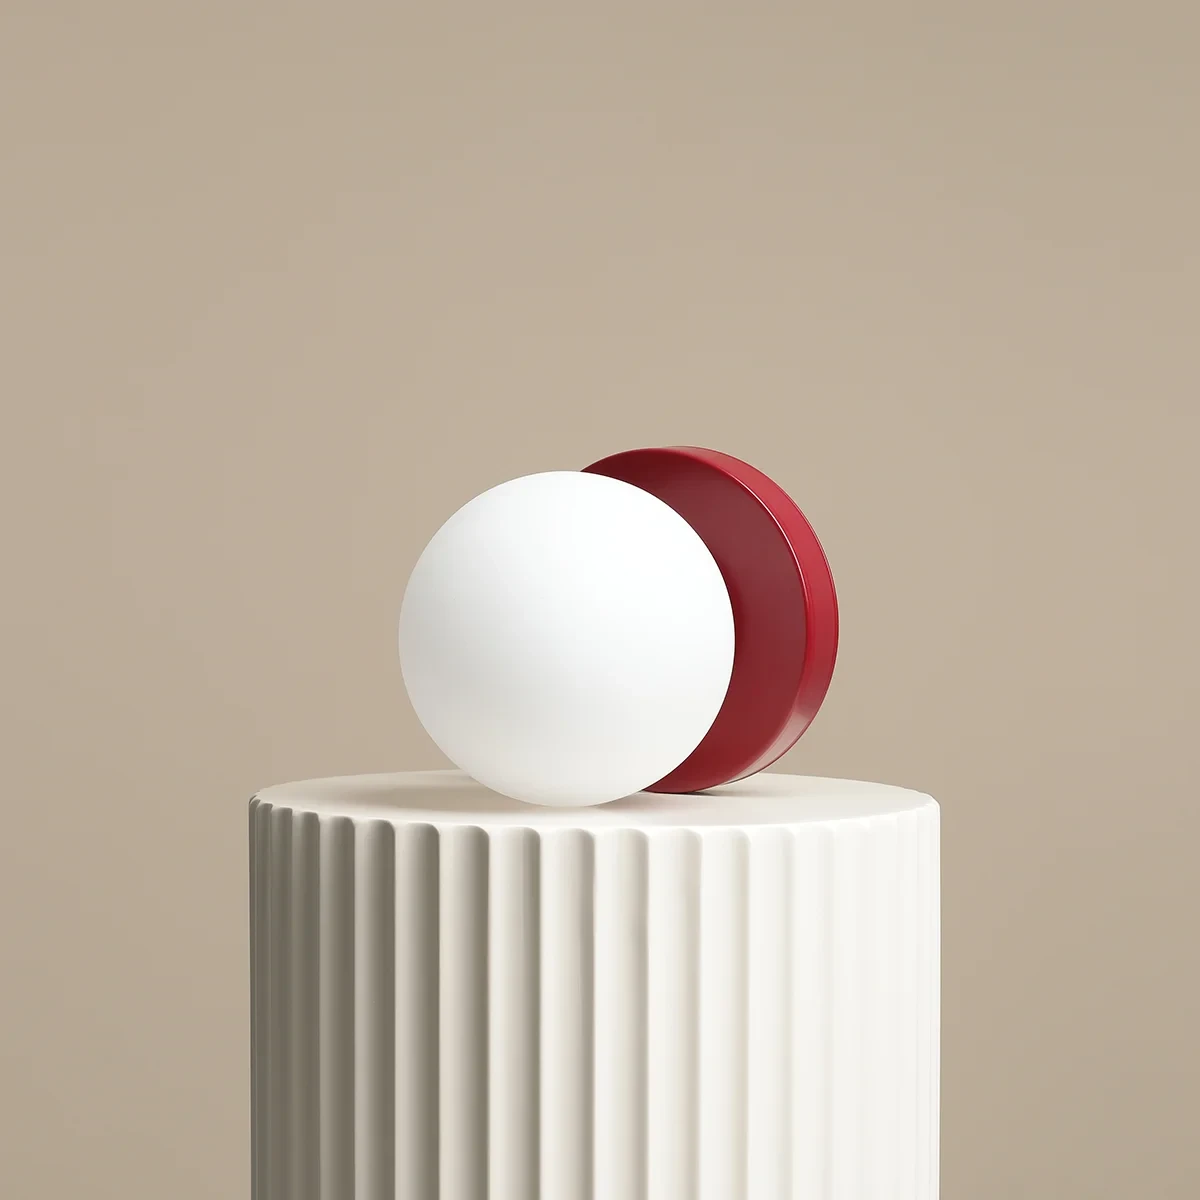 Table lamp Ball S red wine